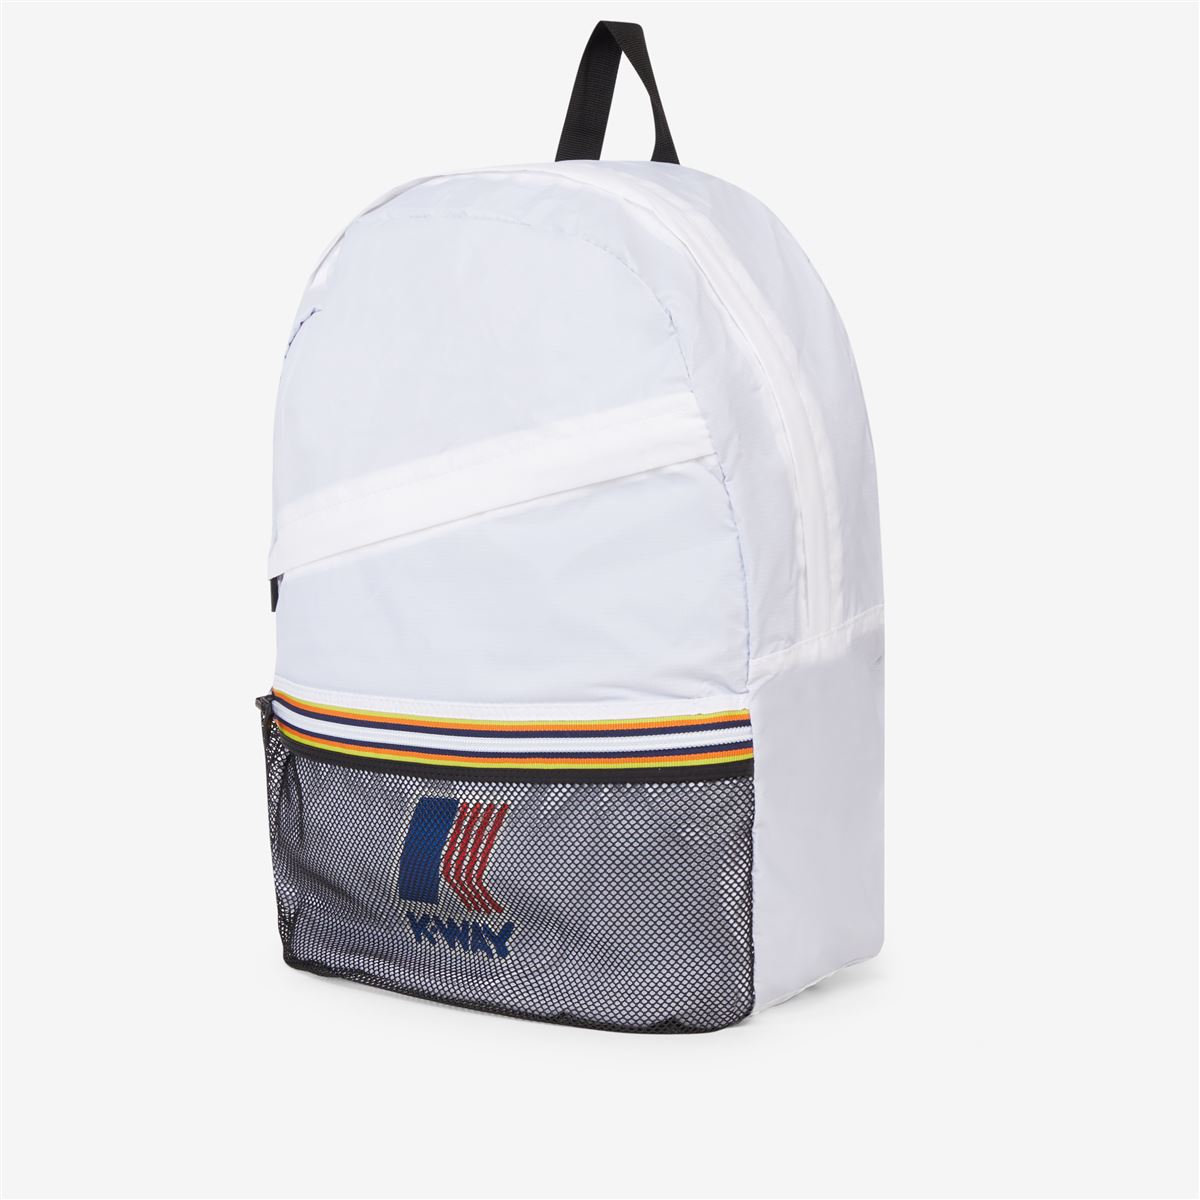 Francois - Packable Ripstop Backpack in White